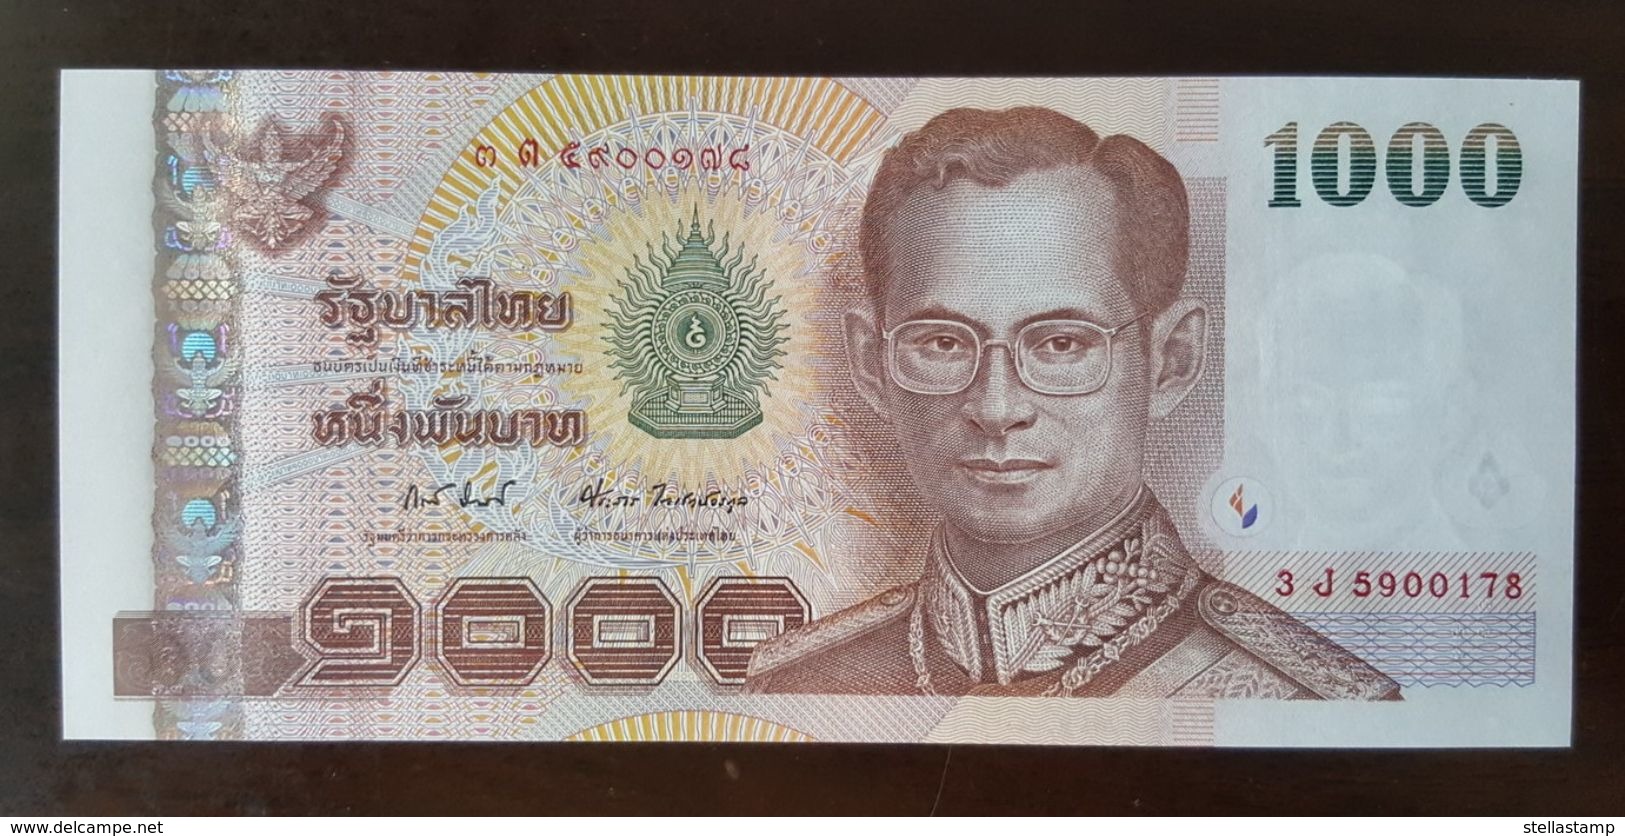 Thailand Banknote 1000 Baht Series 15 P#115 Type2 SIGN#82 UNC - Thailand